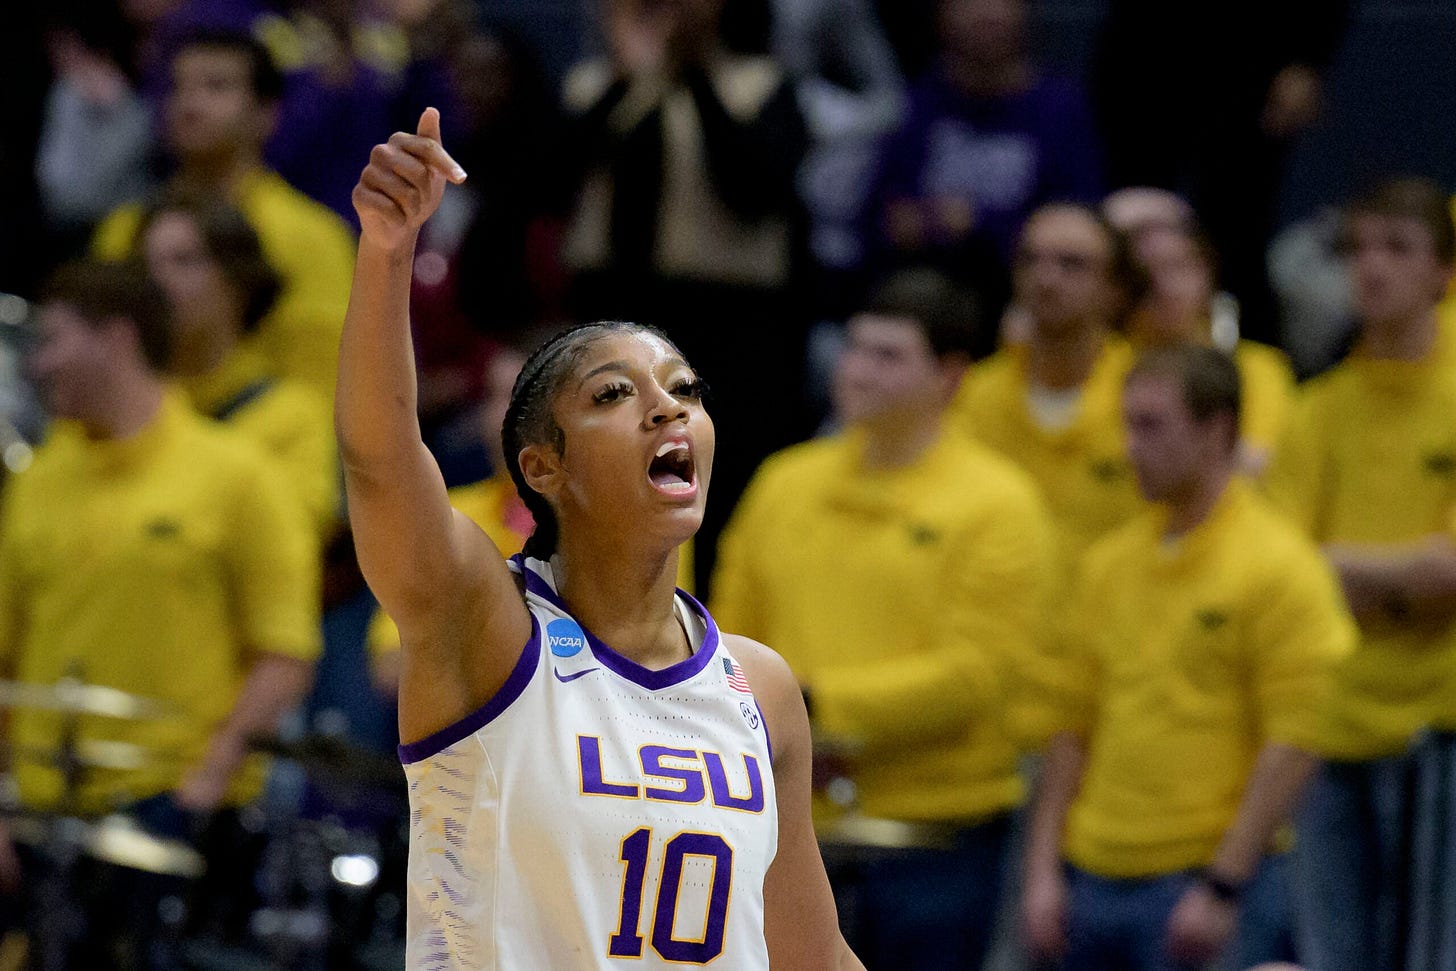 LSU's Angel Reese signs endorsement deal with Reebok